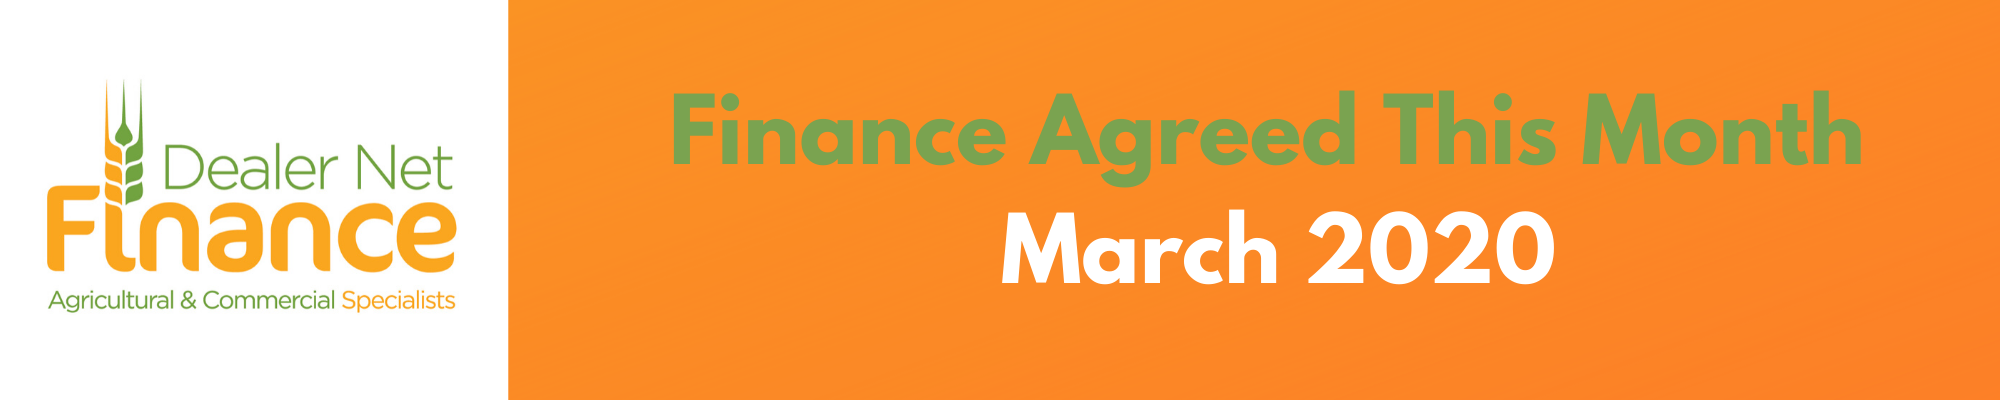 Finance Agreed This Month – March 2020